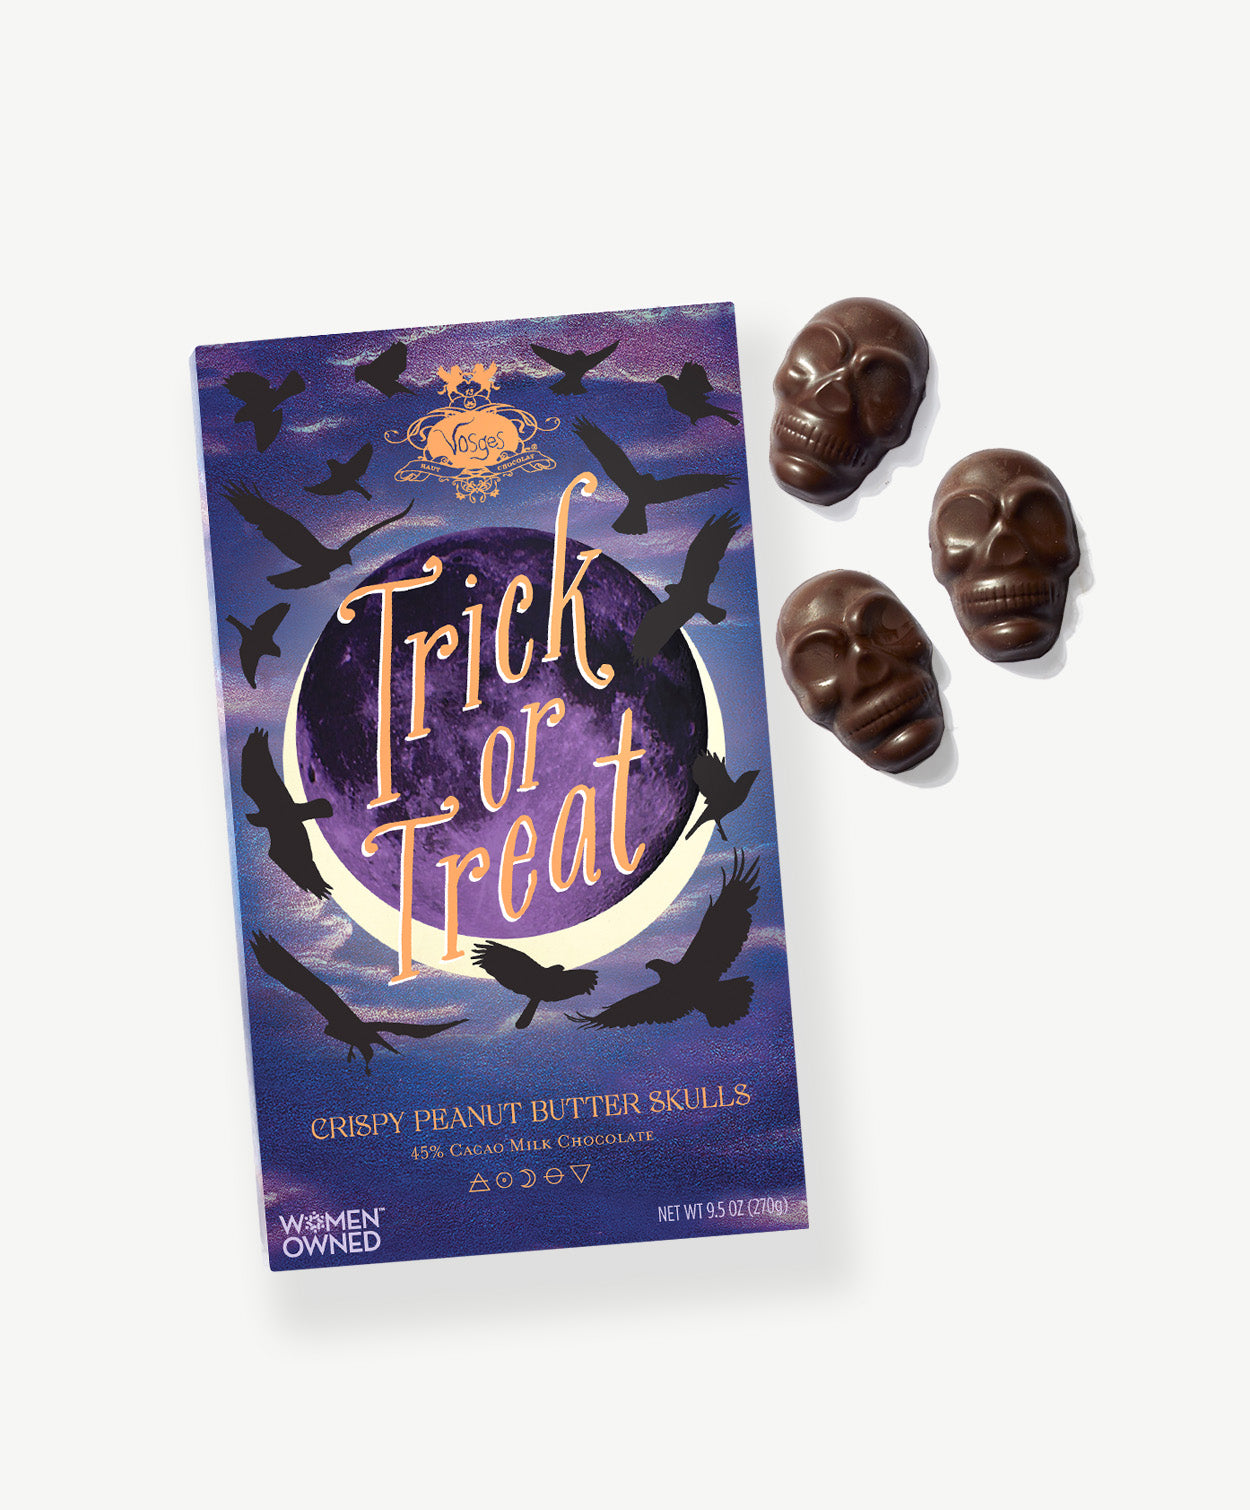 Chocolate Peanut Butter Skulls sit beside a purple and blue box decorated with the silhouettes of birds reading, "Trick or Treat" lay on a light grey background.